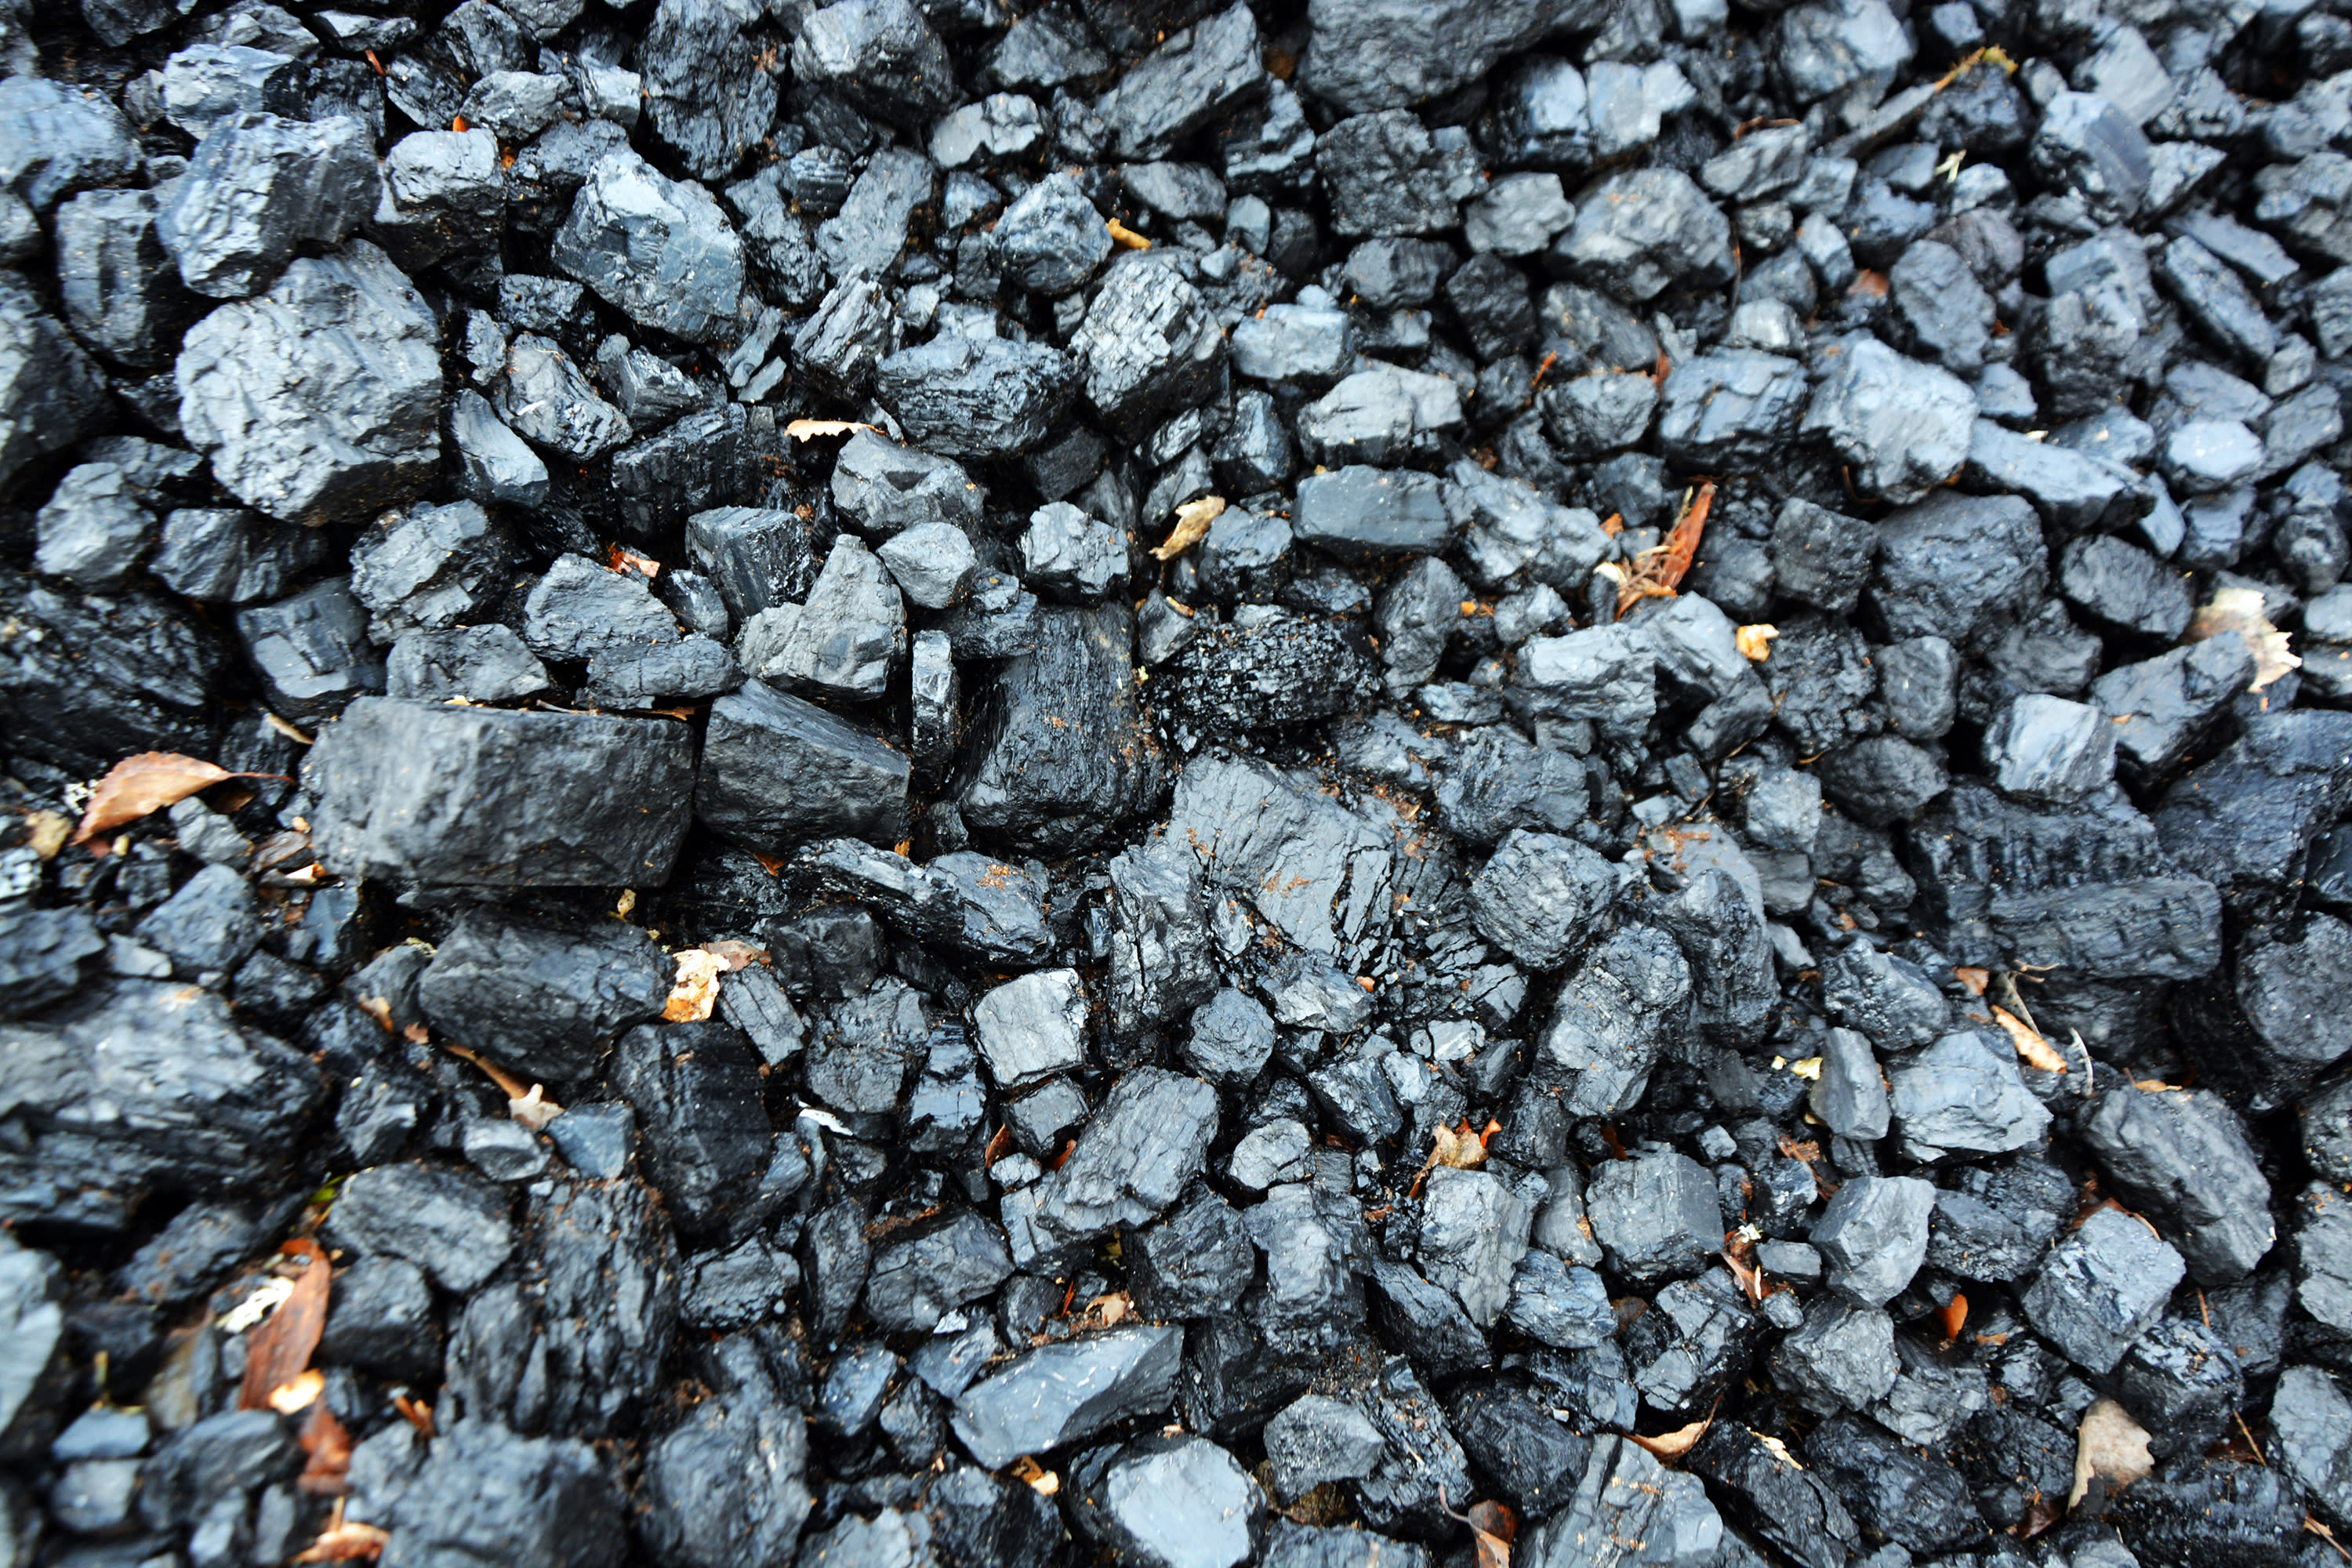 Finland consumed 10 percent more coal last year than in 2021